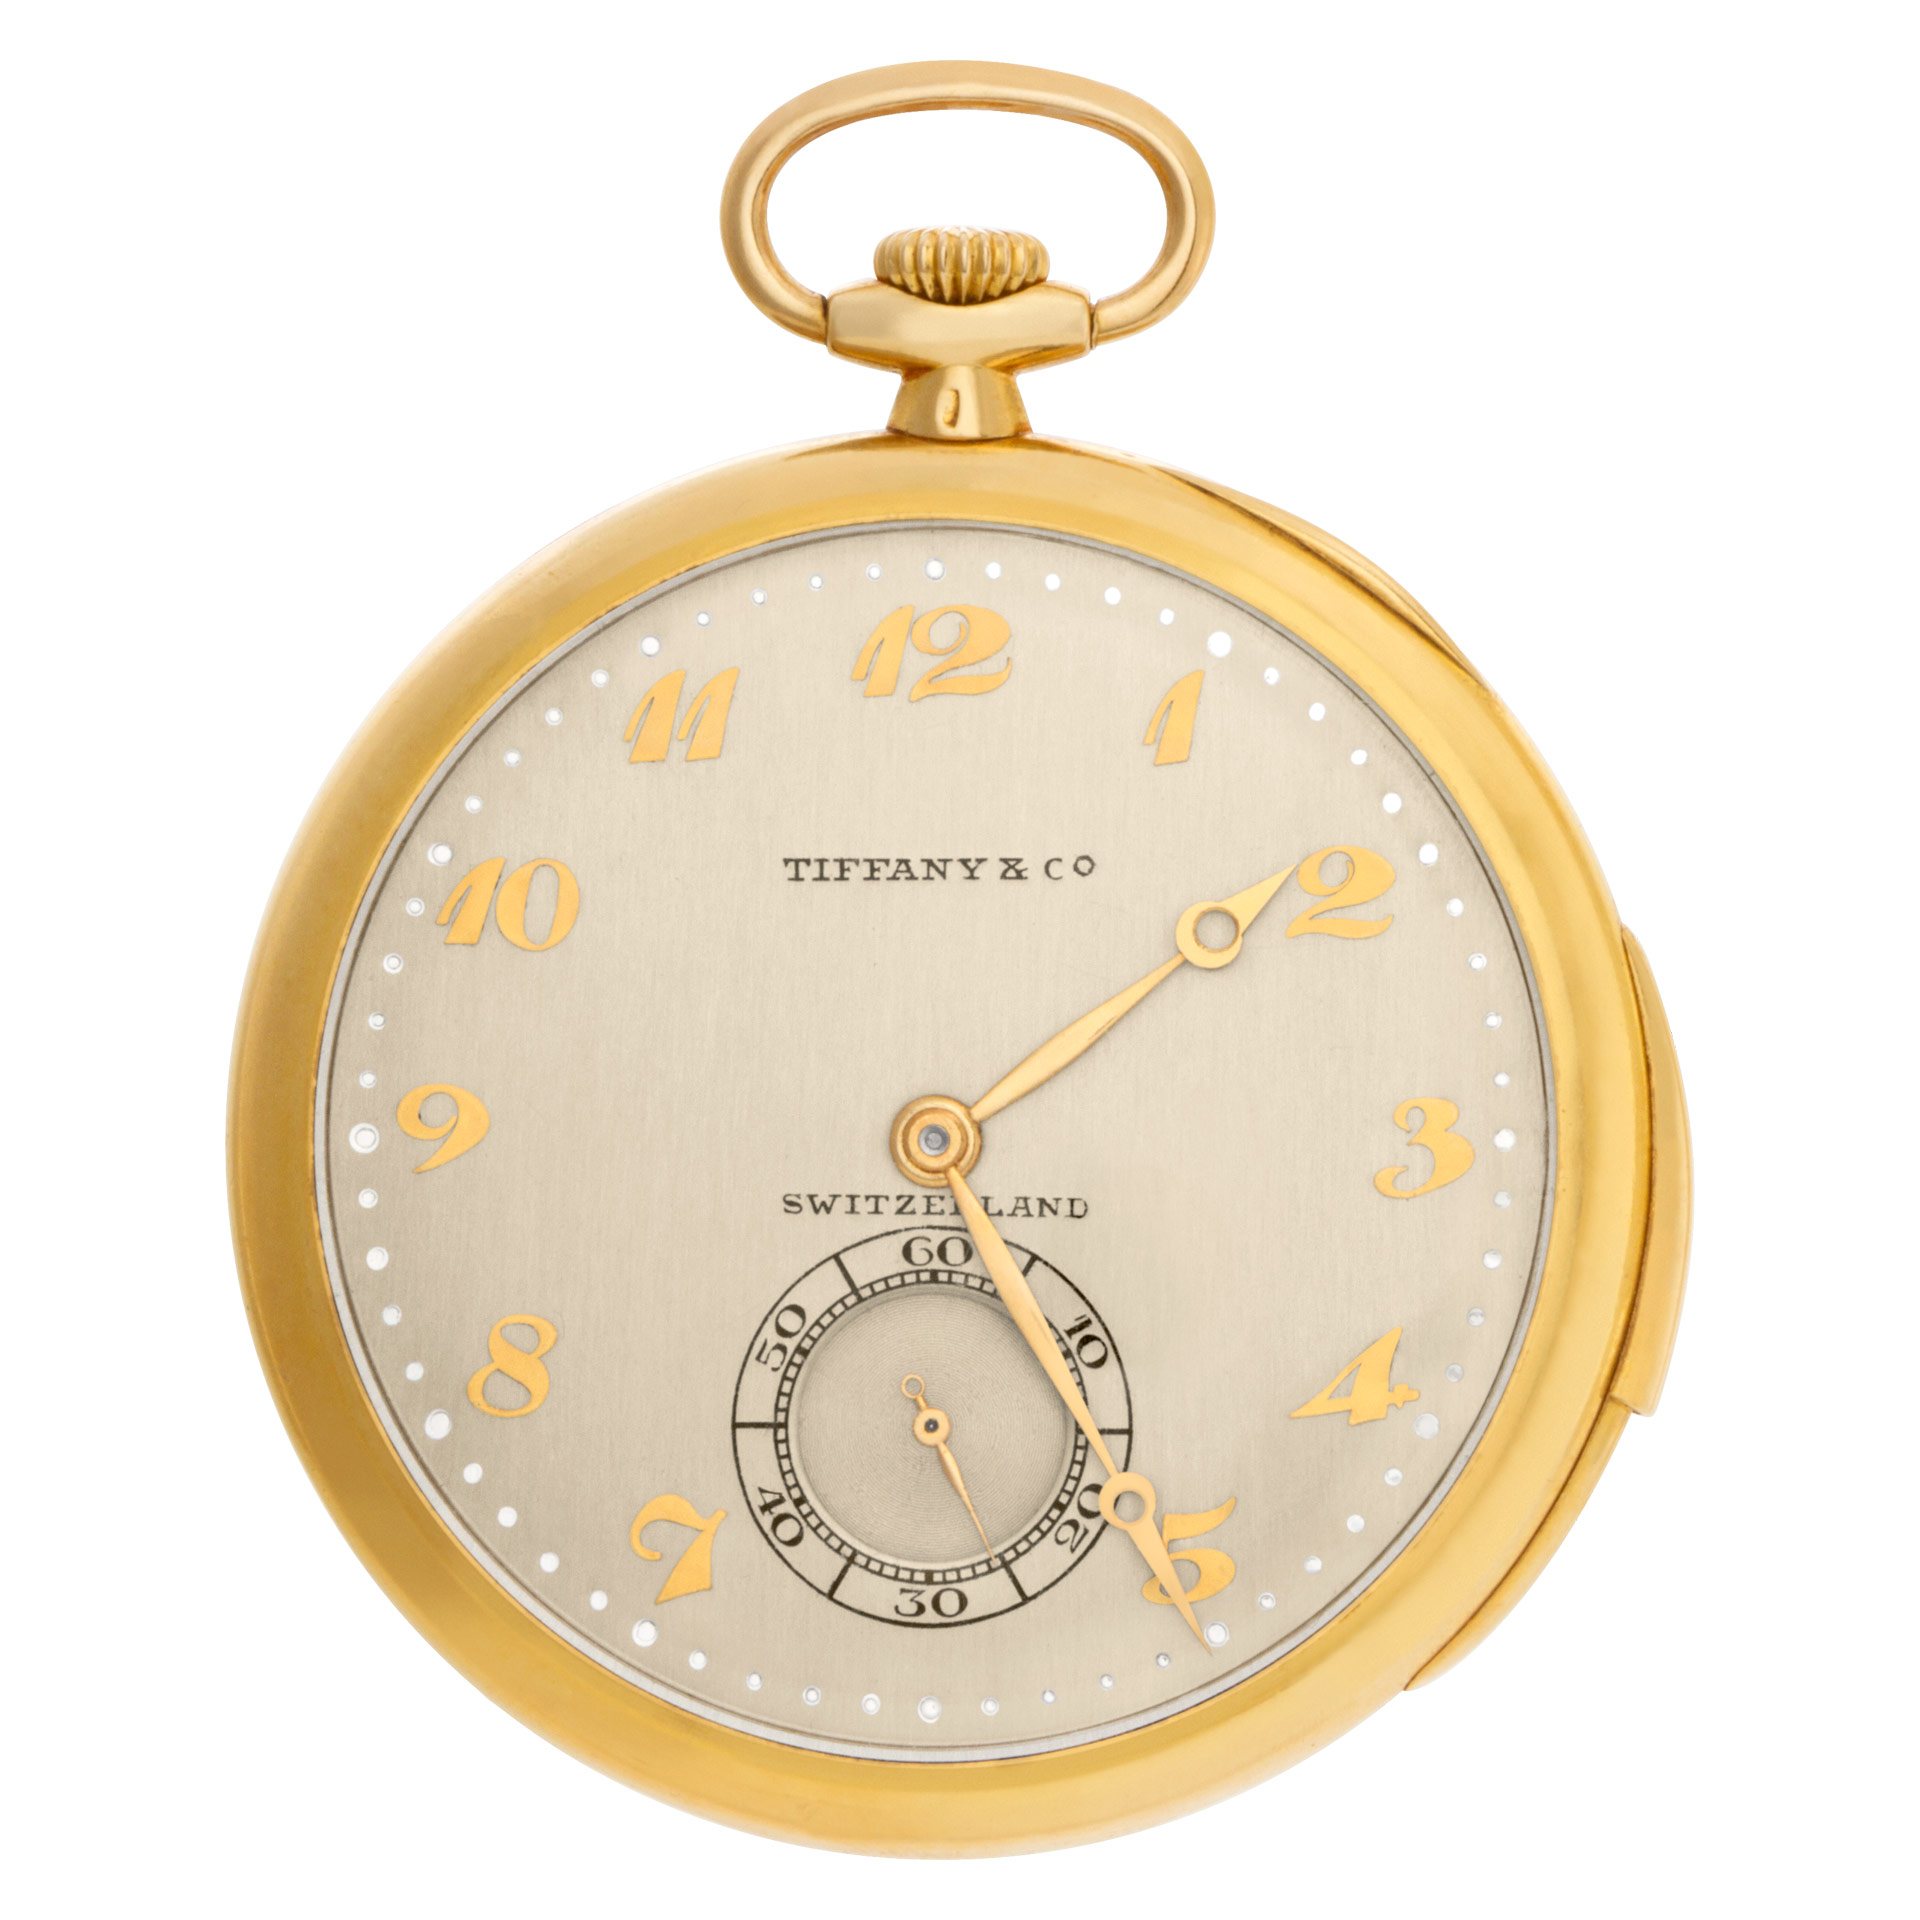 Tiffany & Co. pocket watch 46mm Minute Repeater image 1